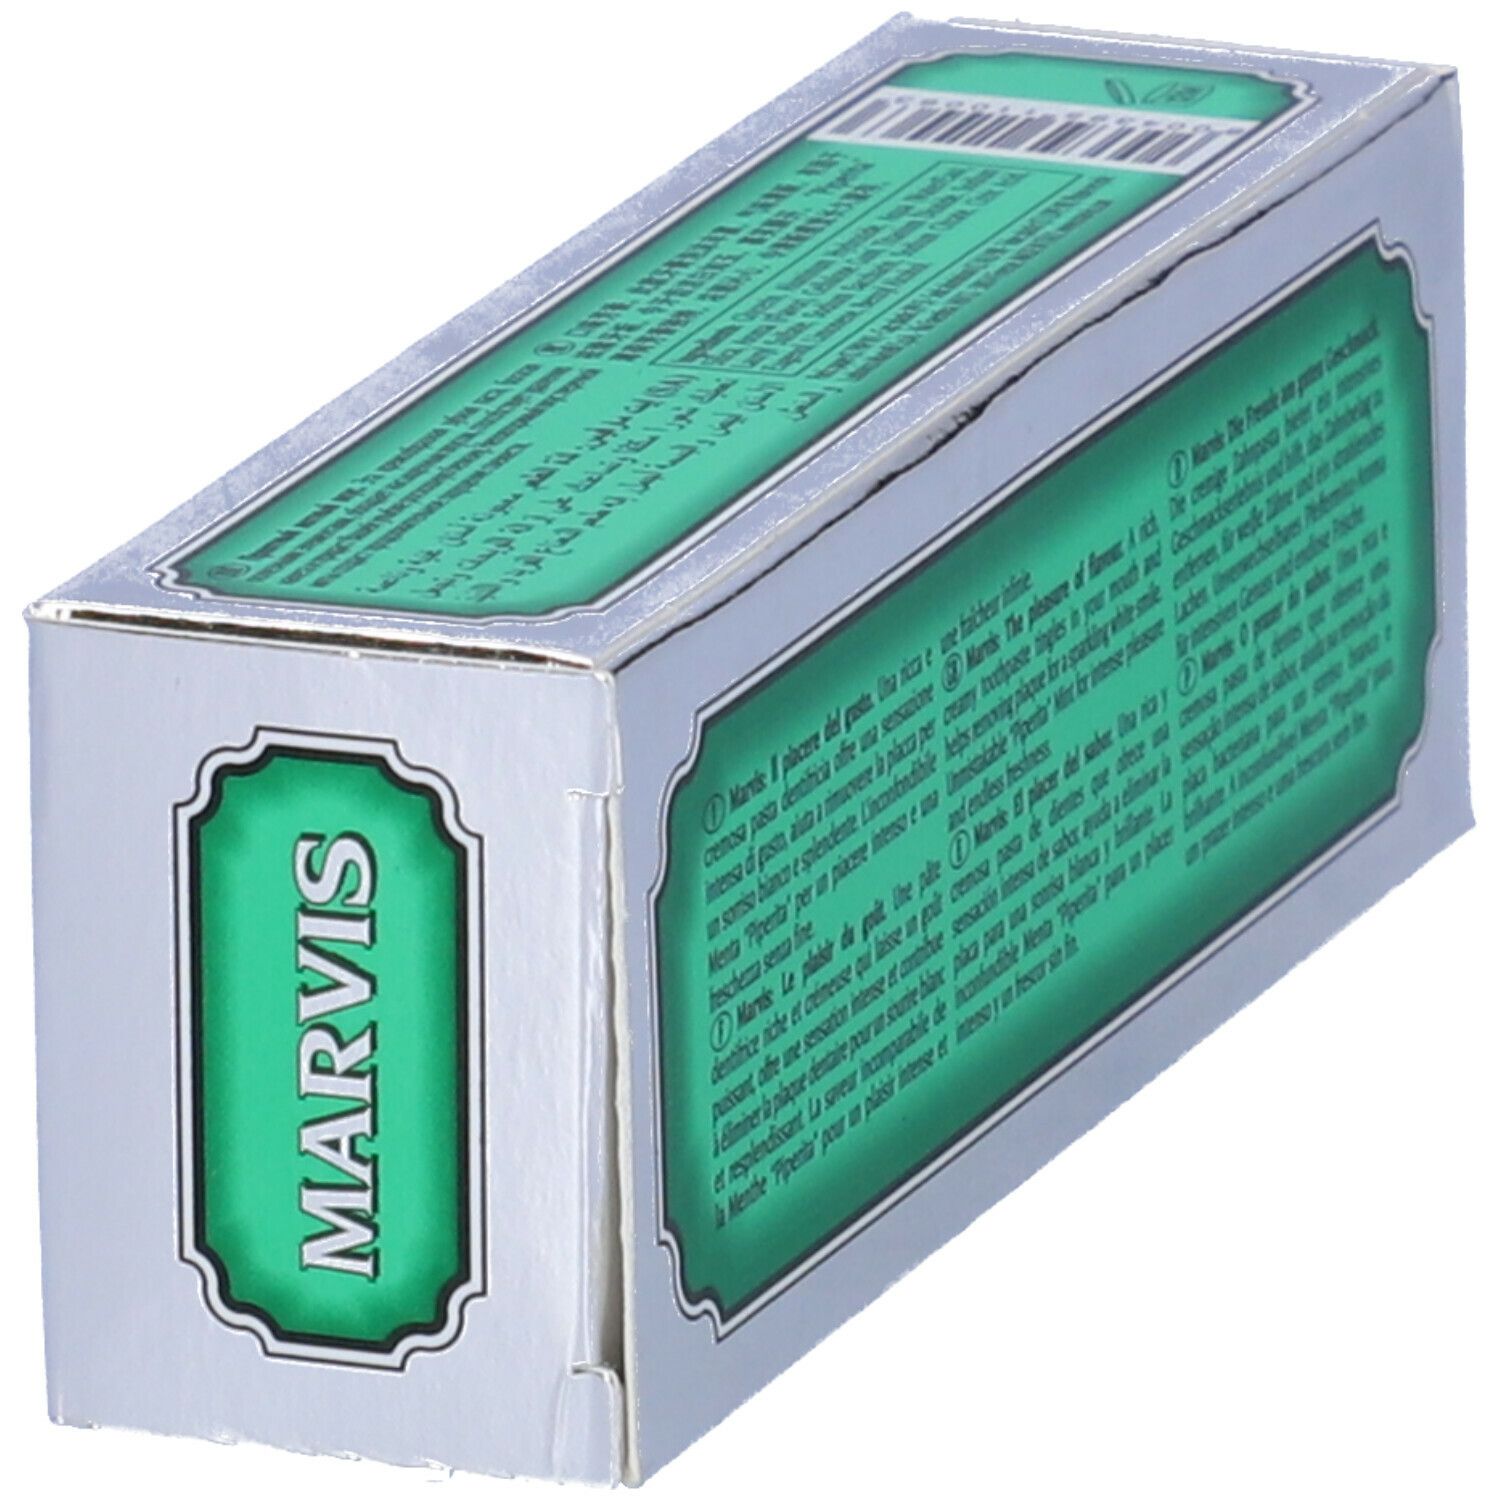 Marvis® Classic Strong Mint